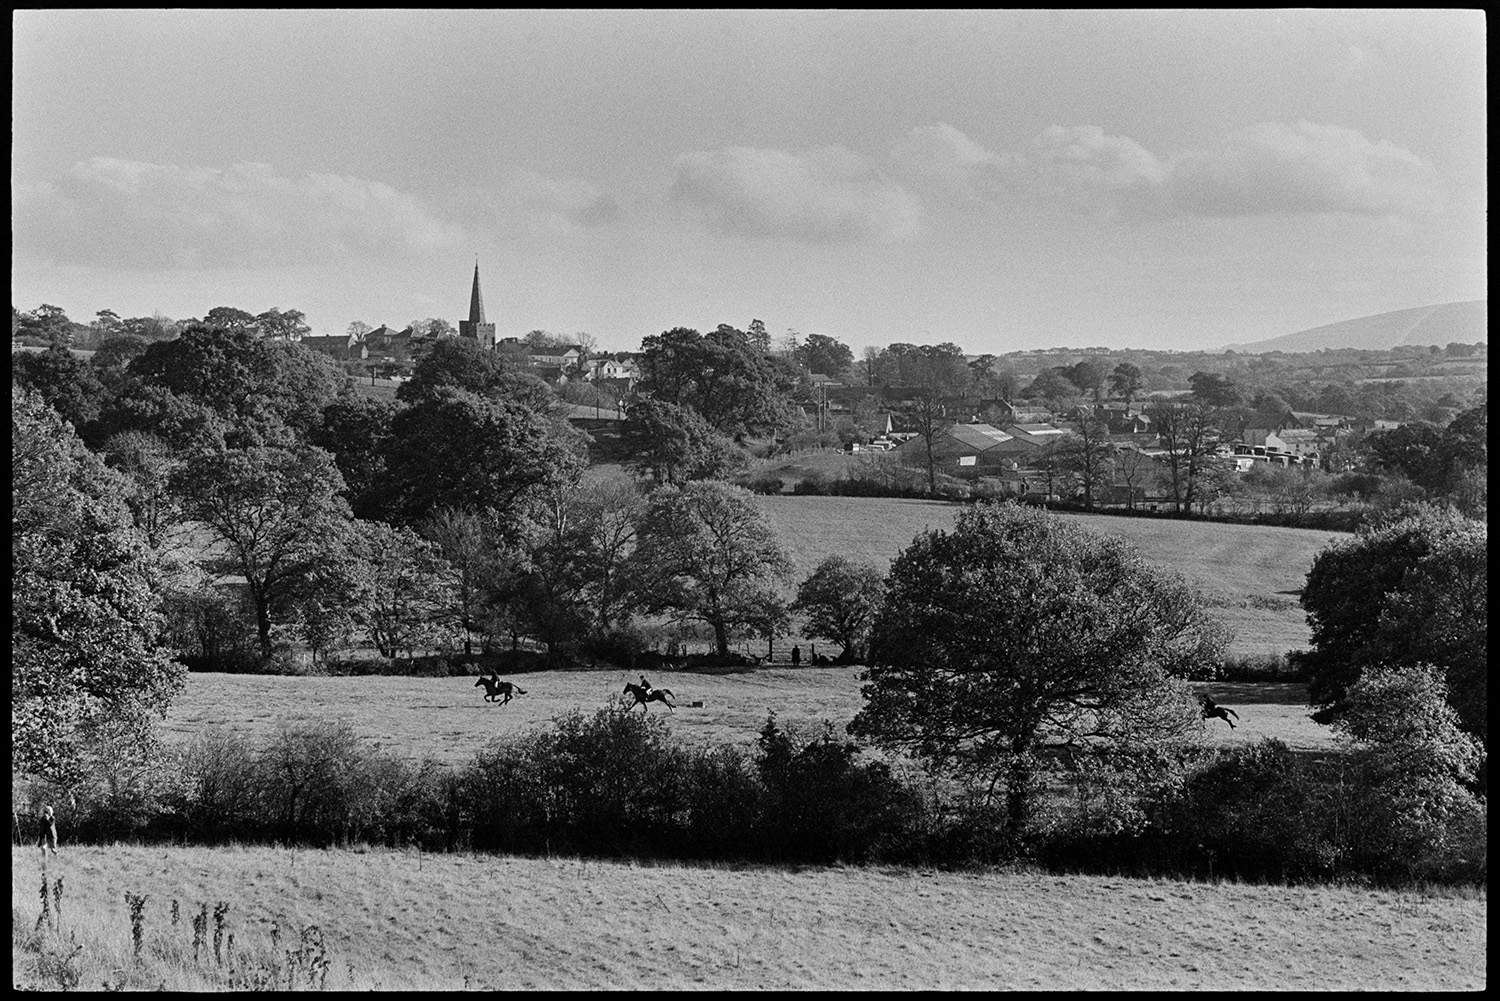 Hunt followers. 
[Huntsmen on horseback riding through a field in Hatherleigh. The village and church spire can be seen behind trees in the background.]